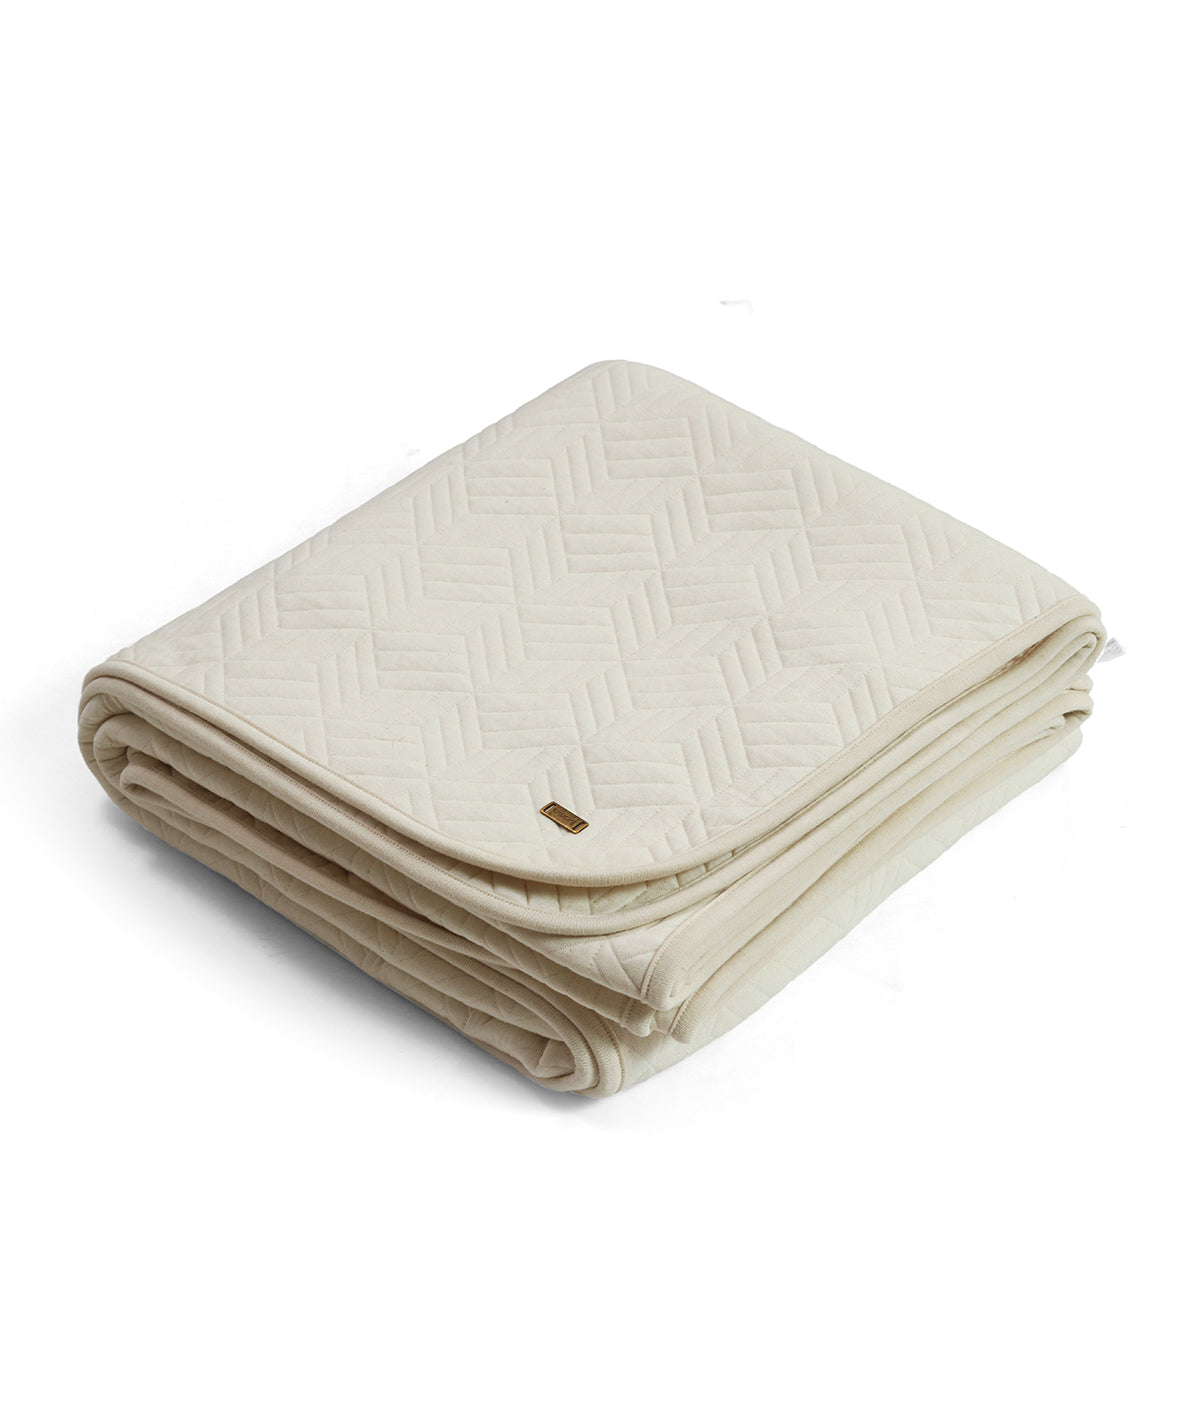 3D Cubic Single Bed Quilted Blanket (Natural)(152cm x 228cm)